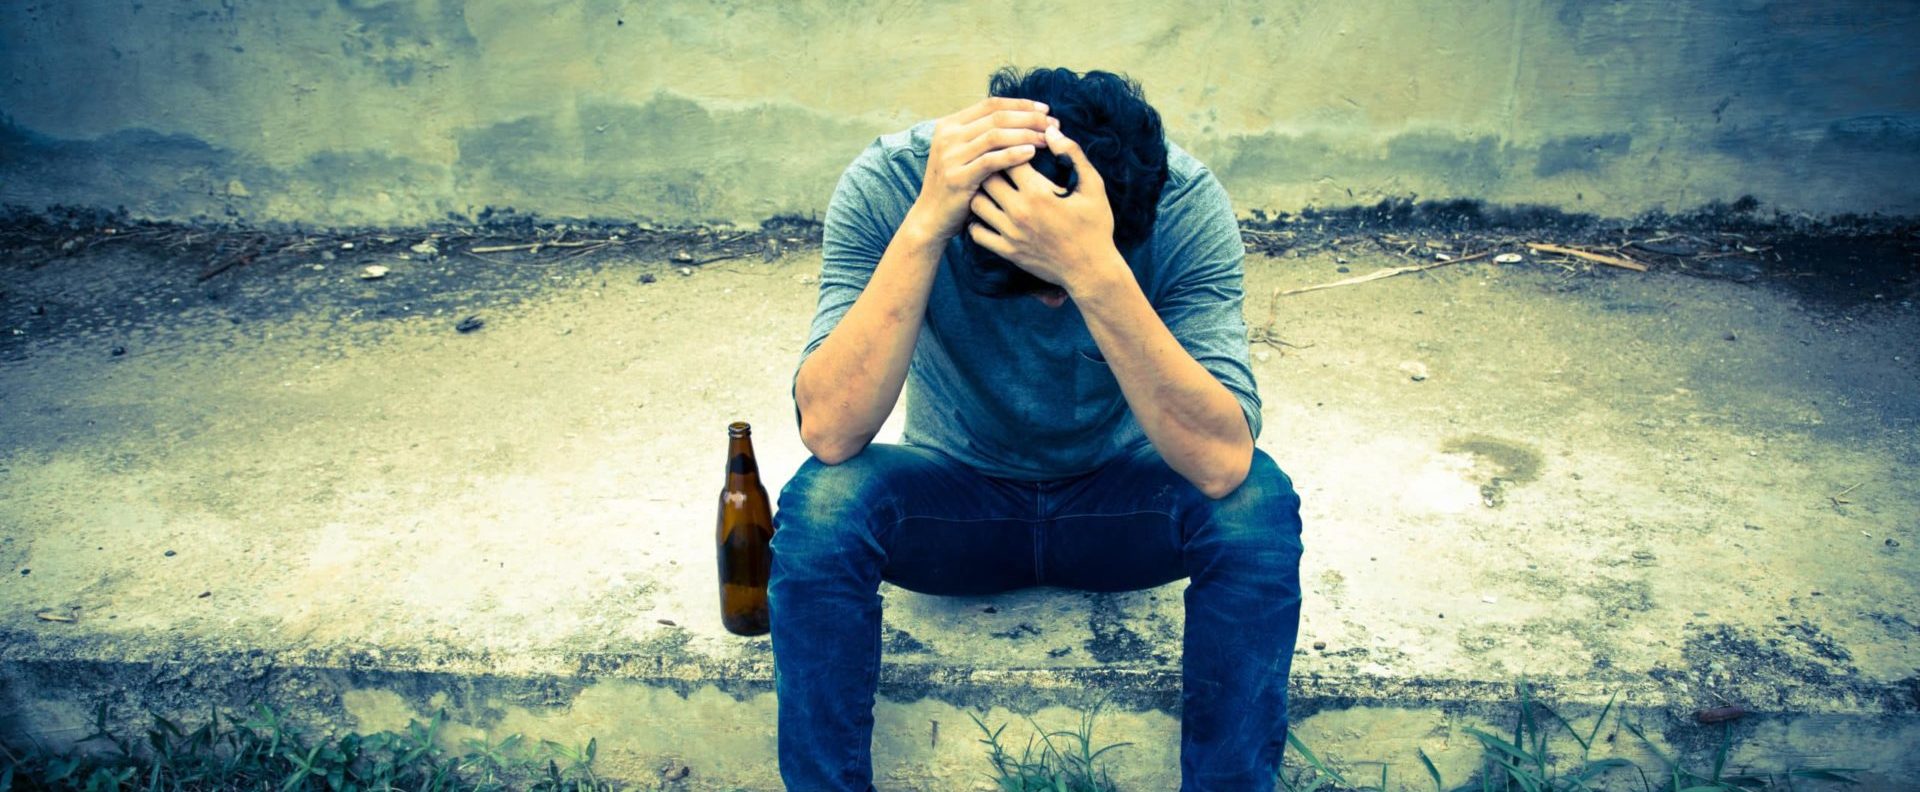 A guy is sitting on dirty cement with debris in the back, he has a beer bottle next to him and his head in his hands